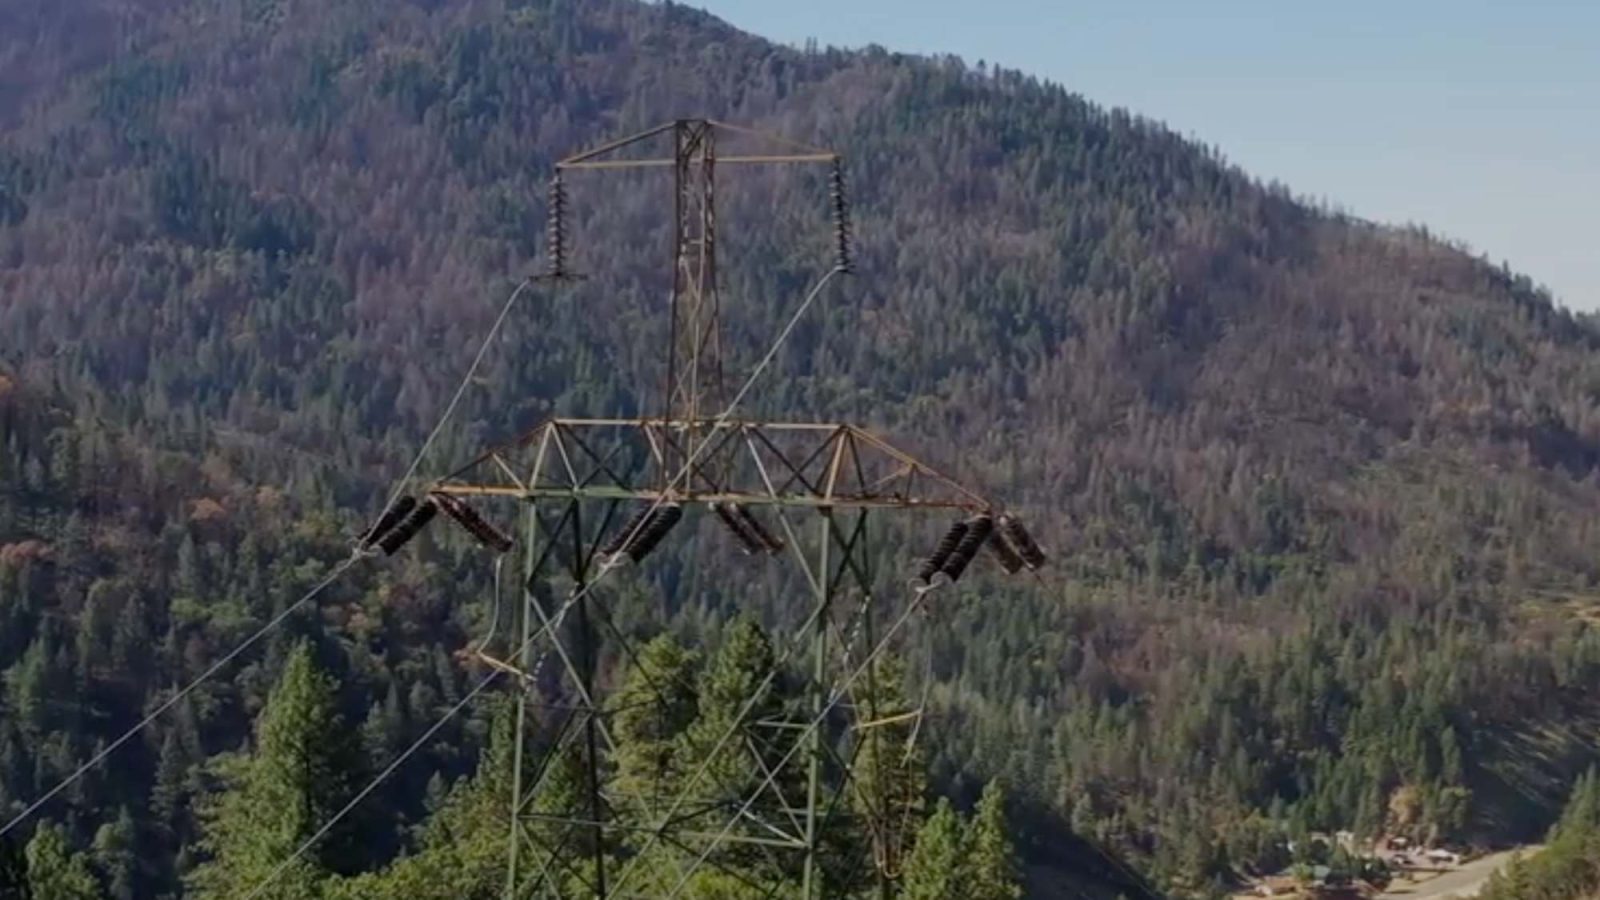 Drone footage shows the aging PG&E transmission towers in California